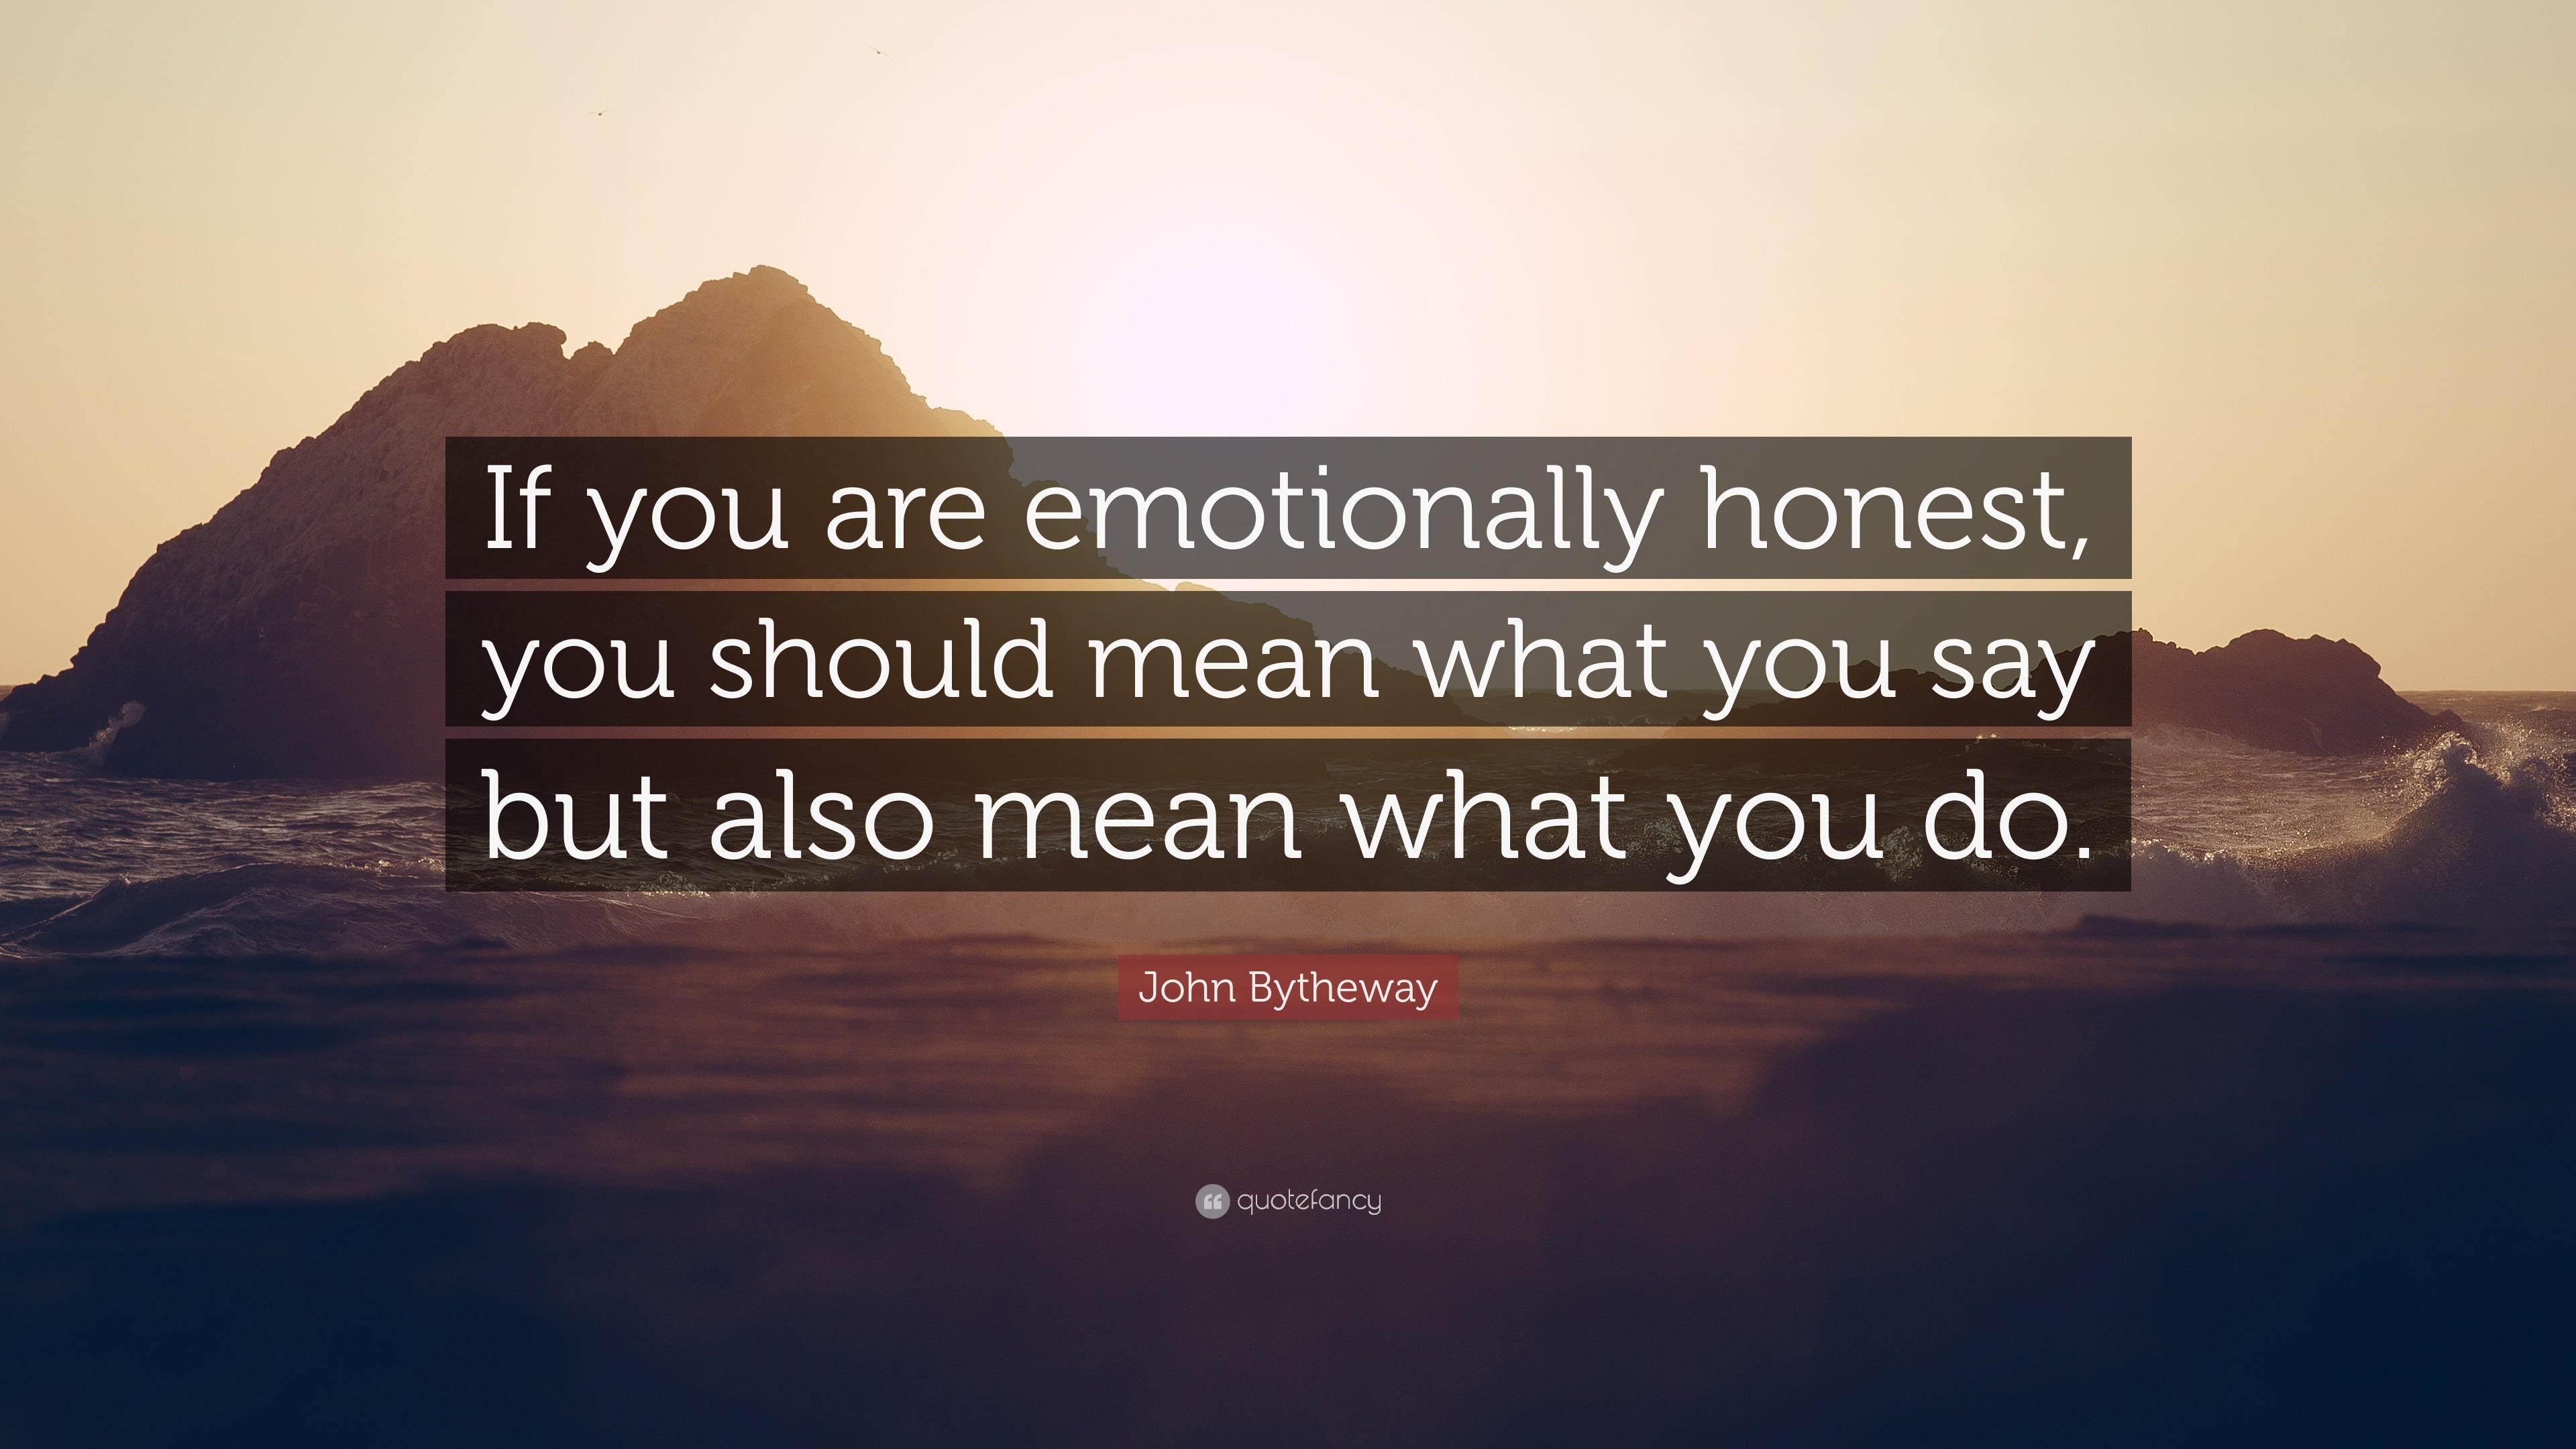 John Bytheway Quote: “If you are emotionally honest, you should mean ...